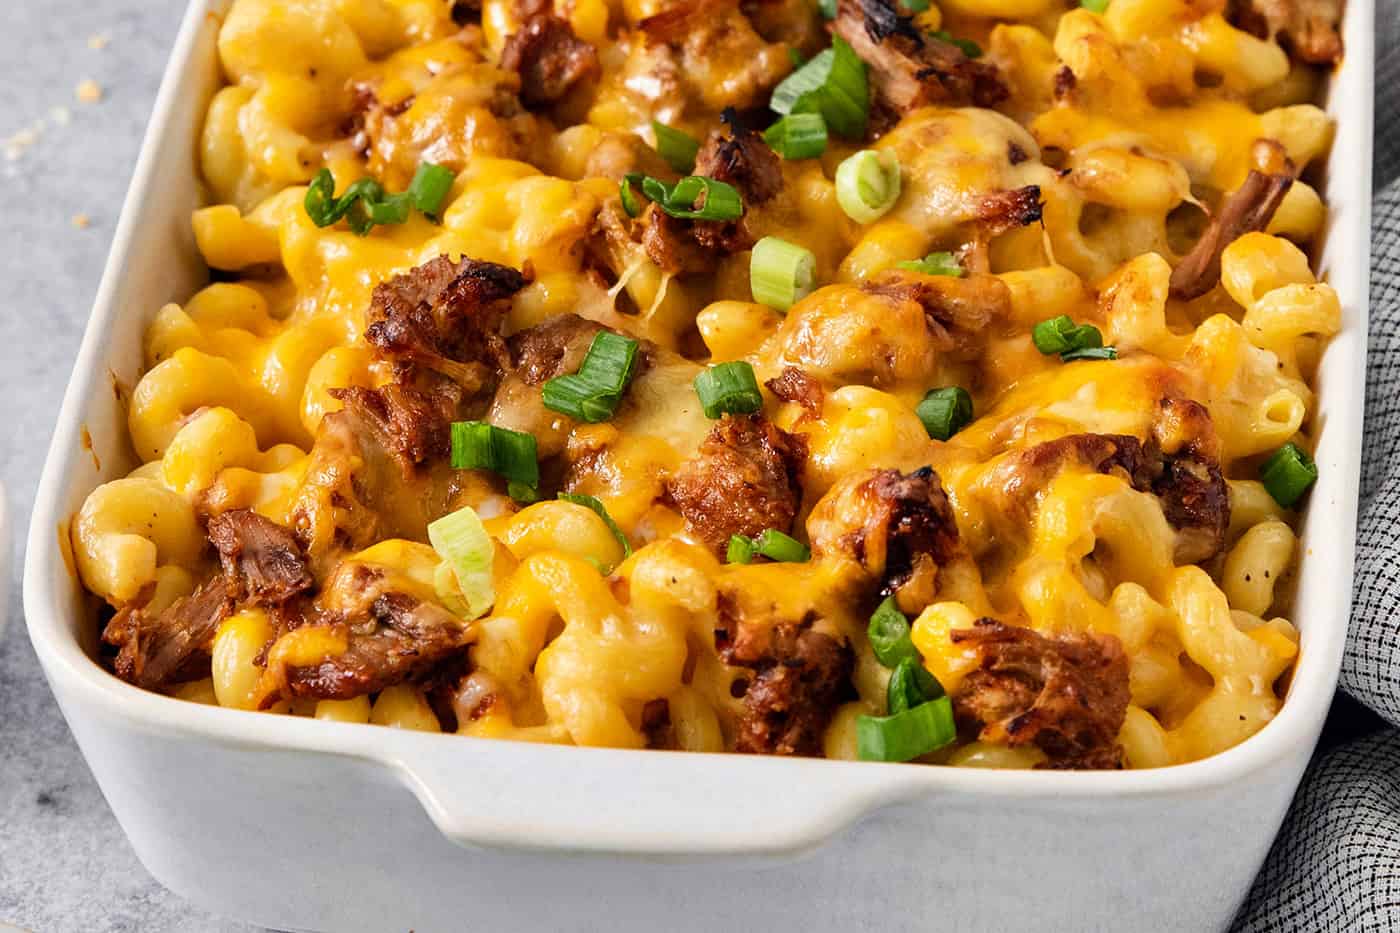 A green onion-topped casserole dish full of cooked pulled pork mac and cheese.